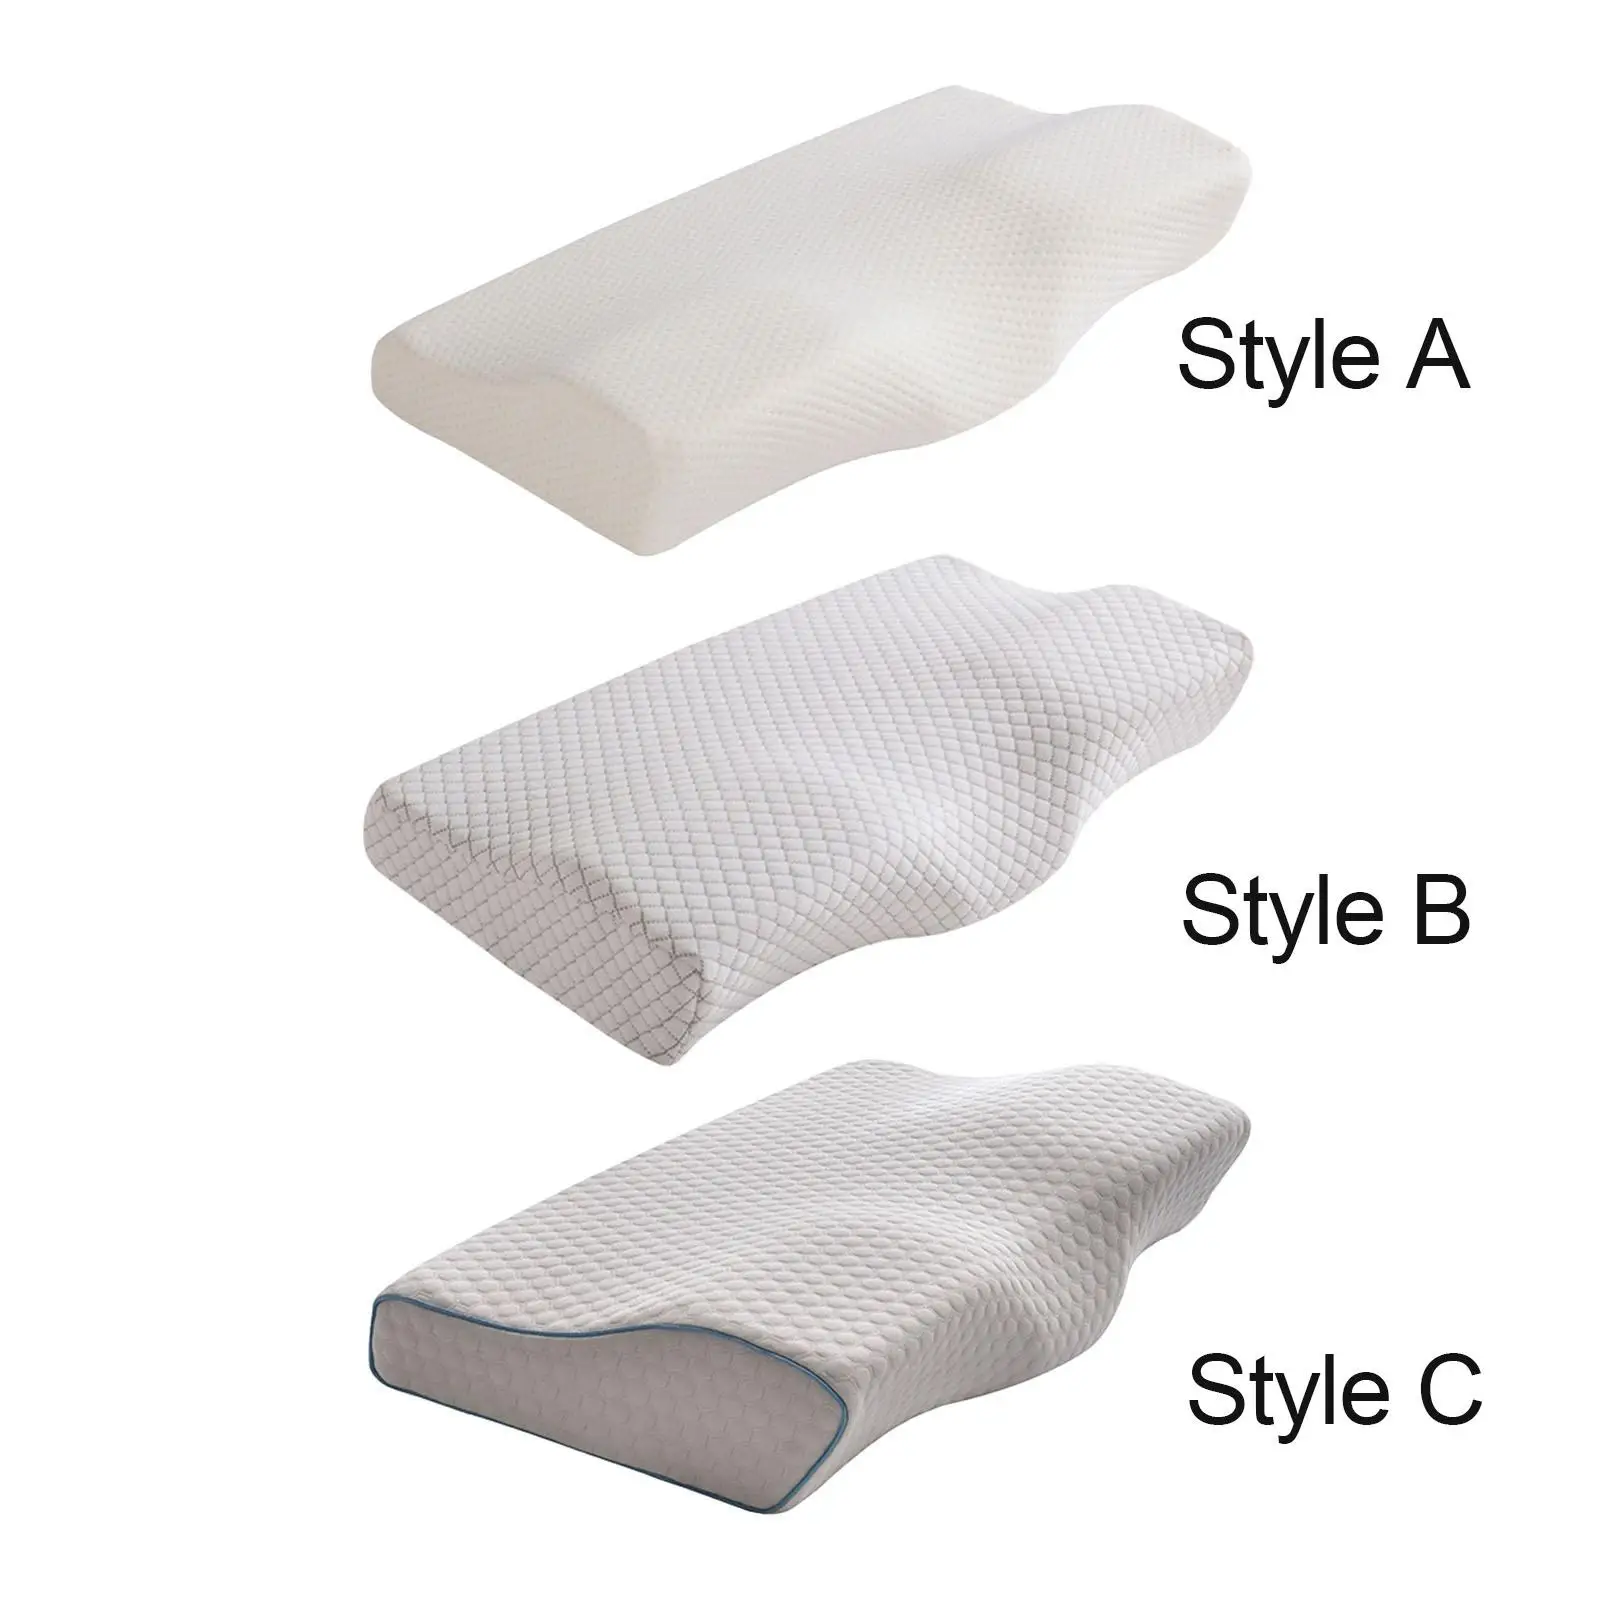 Bed Support Pillow for Hotel Sleeping Home Bedroom Adult